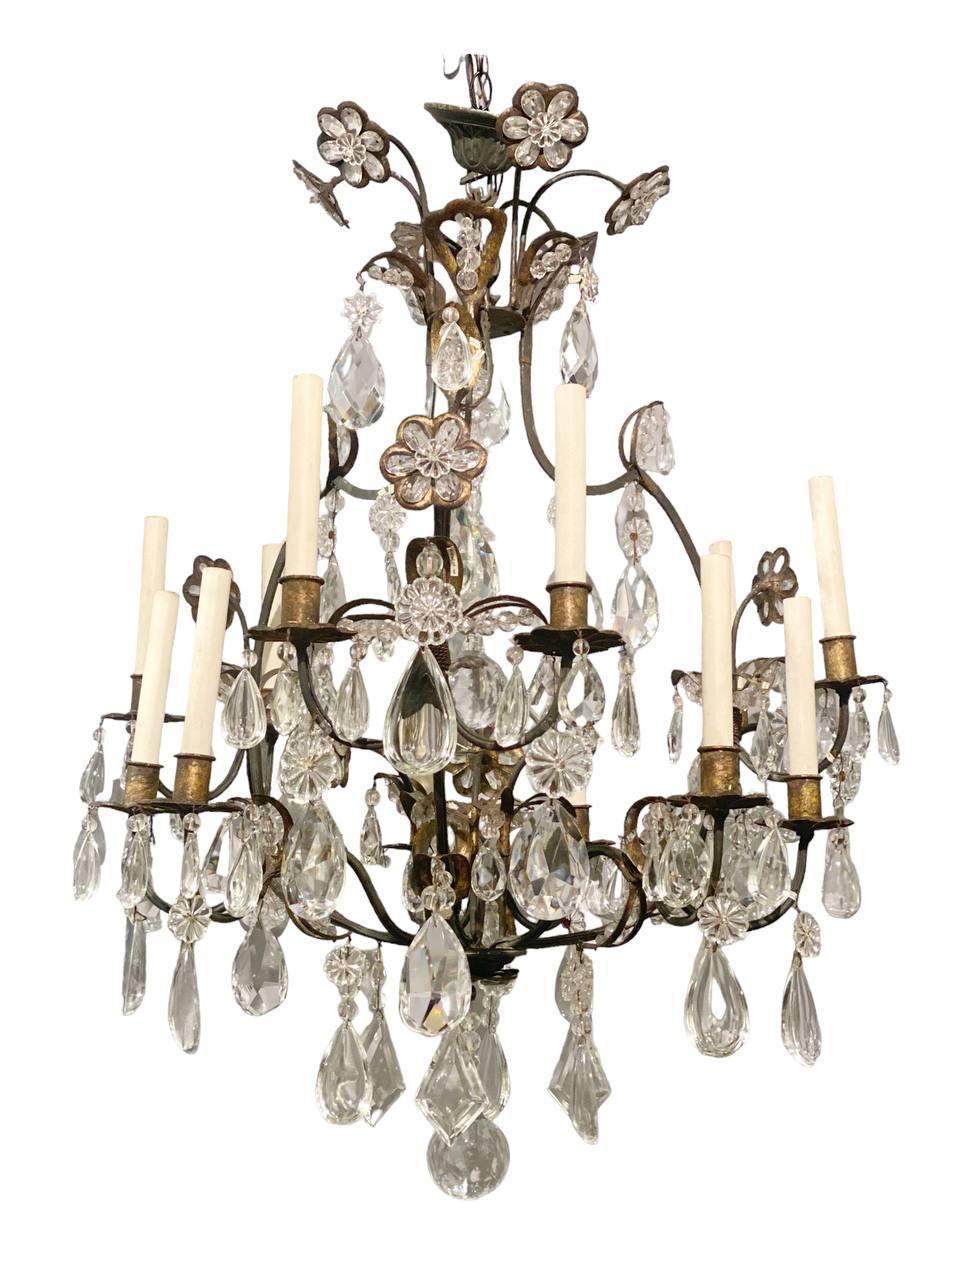 1930's French Gilt Metal and Crystal Chandelier with 12 lights In Good Condition For Sale In New York, NY